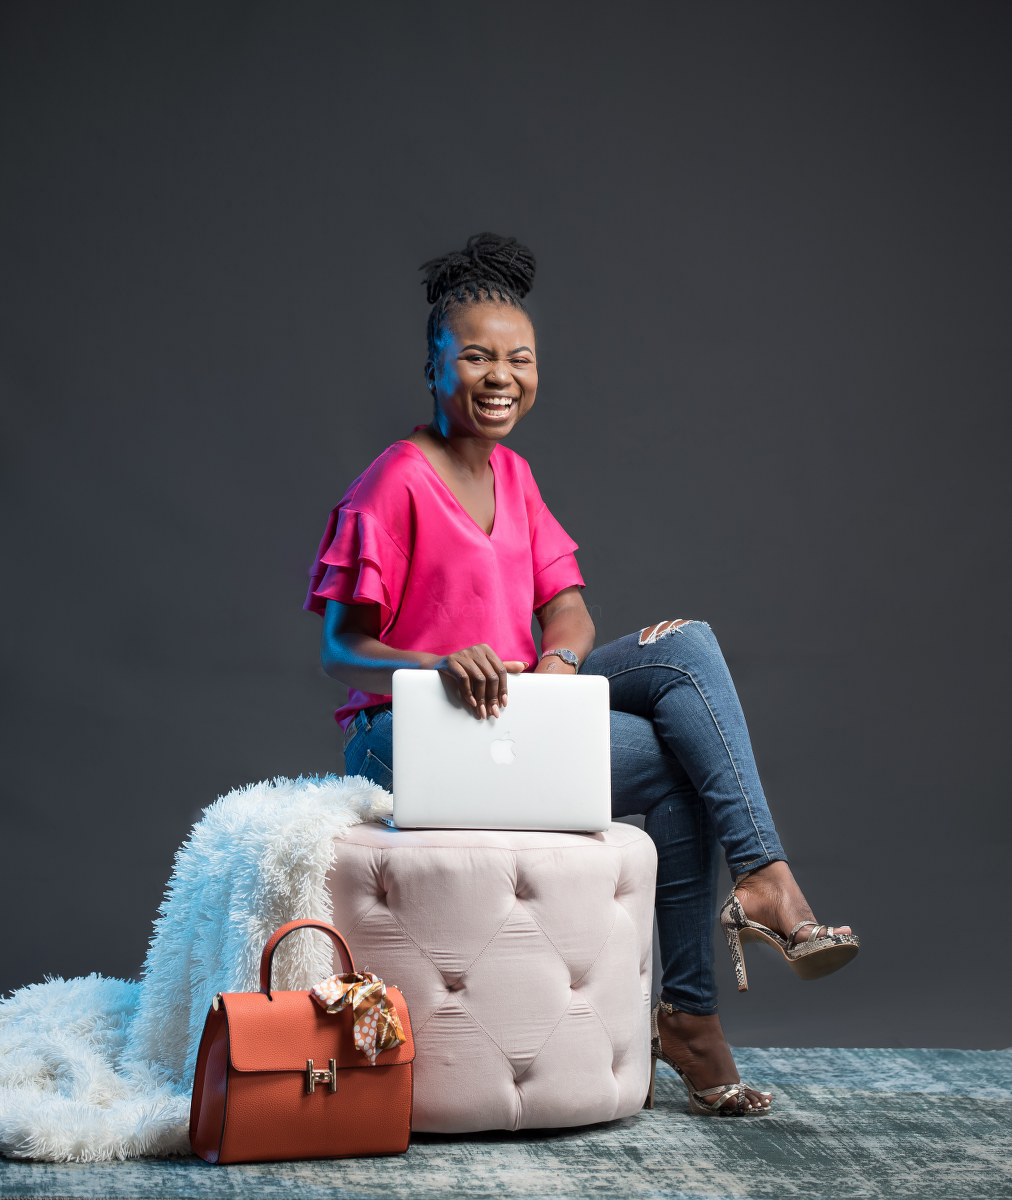 Good music and sweet conversations are what you can expect on the #CapricornExperience. @Hlekanis is waiting to hear from you, connect with her via WhatsApp on 079 899 6226.